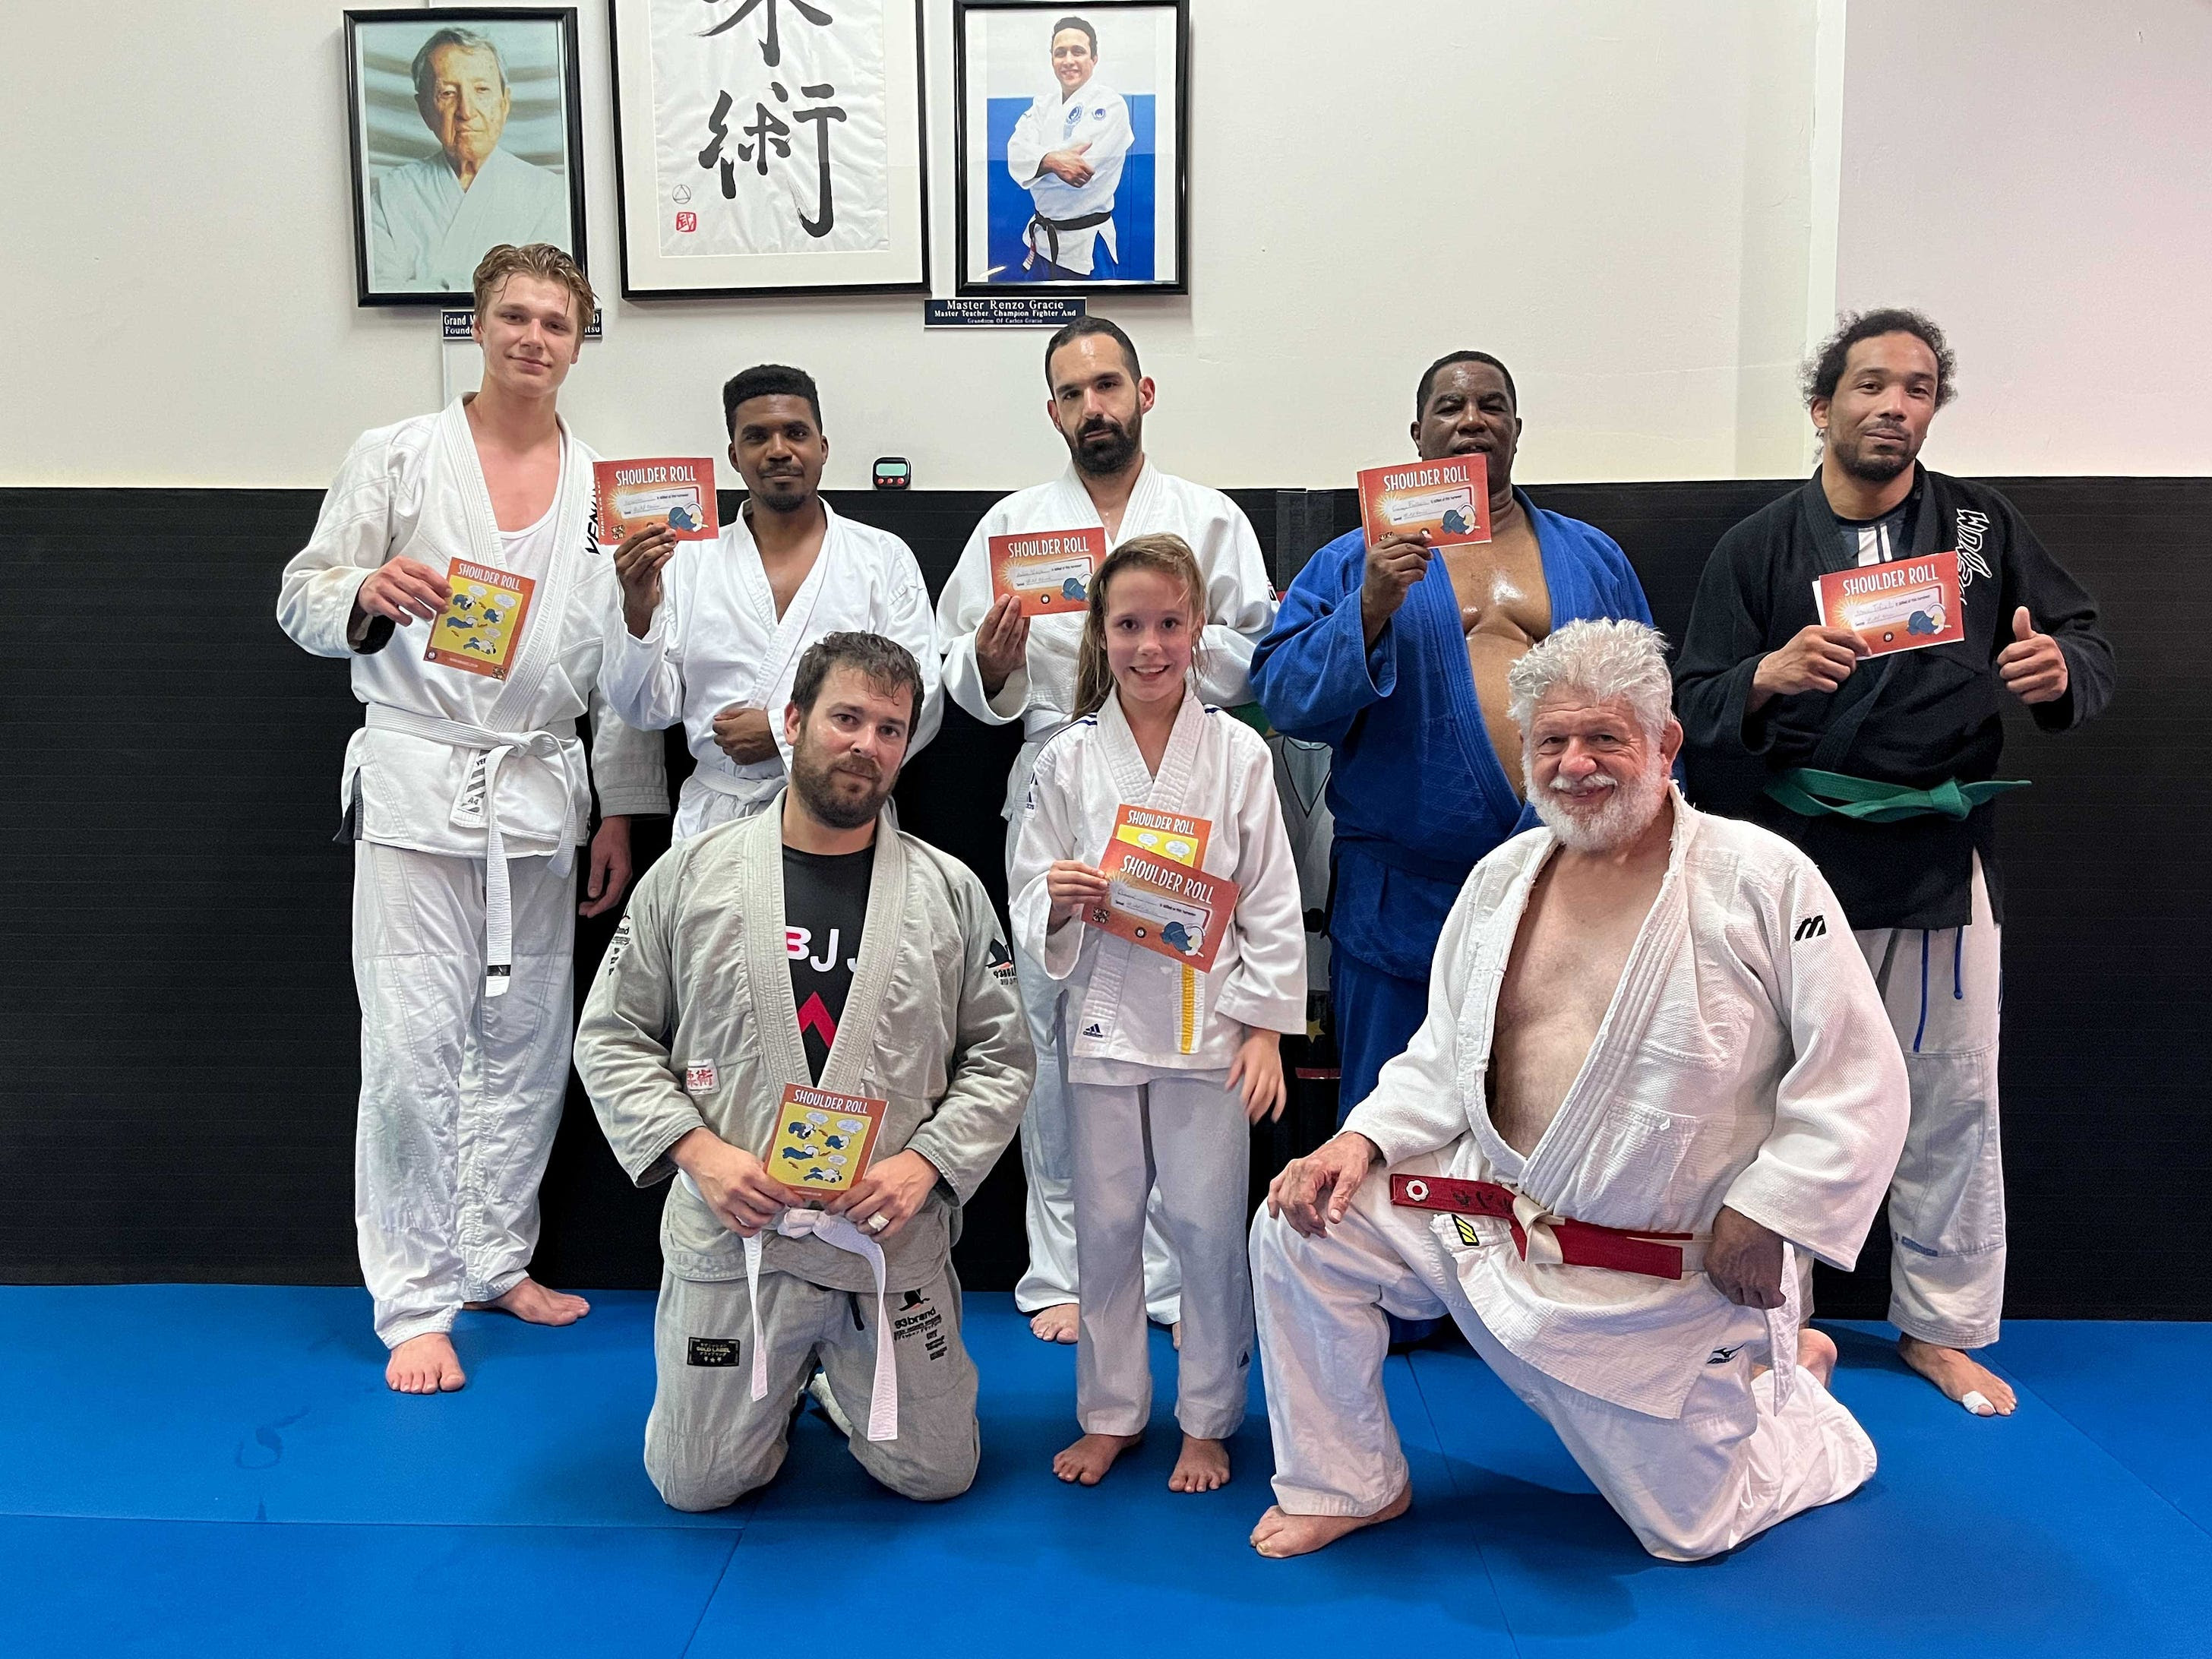 Free Judo Resources for adults as well as kids